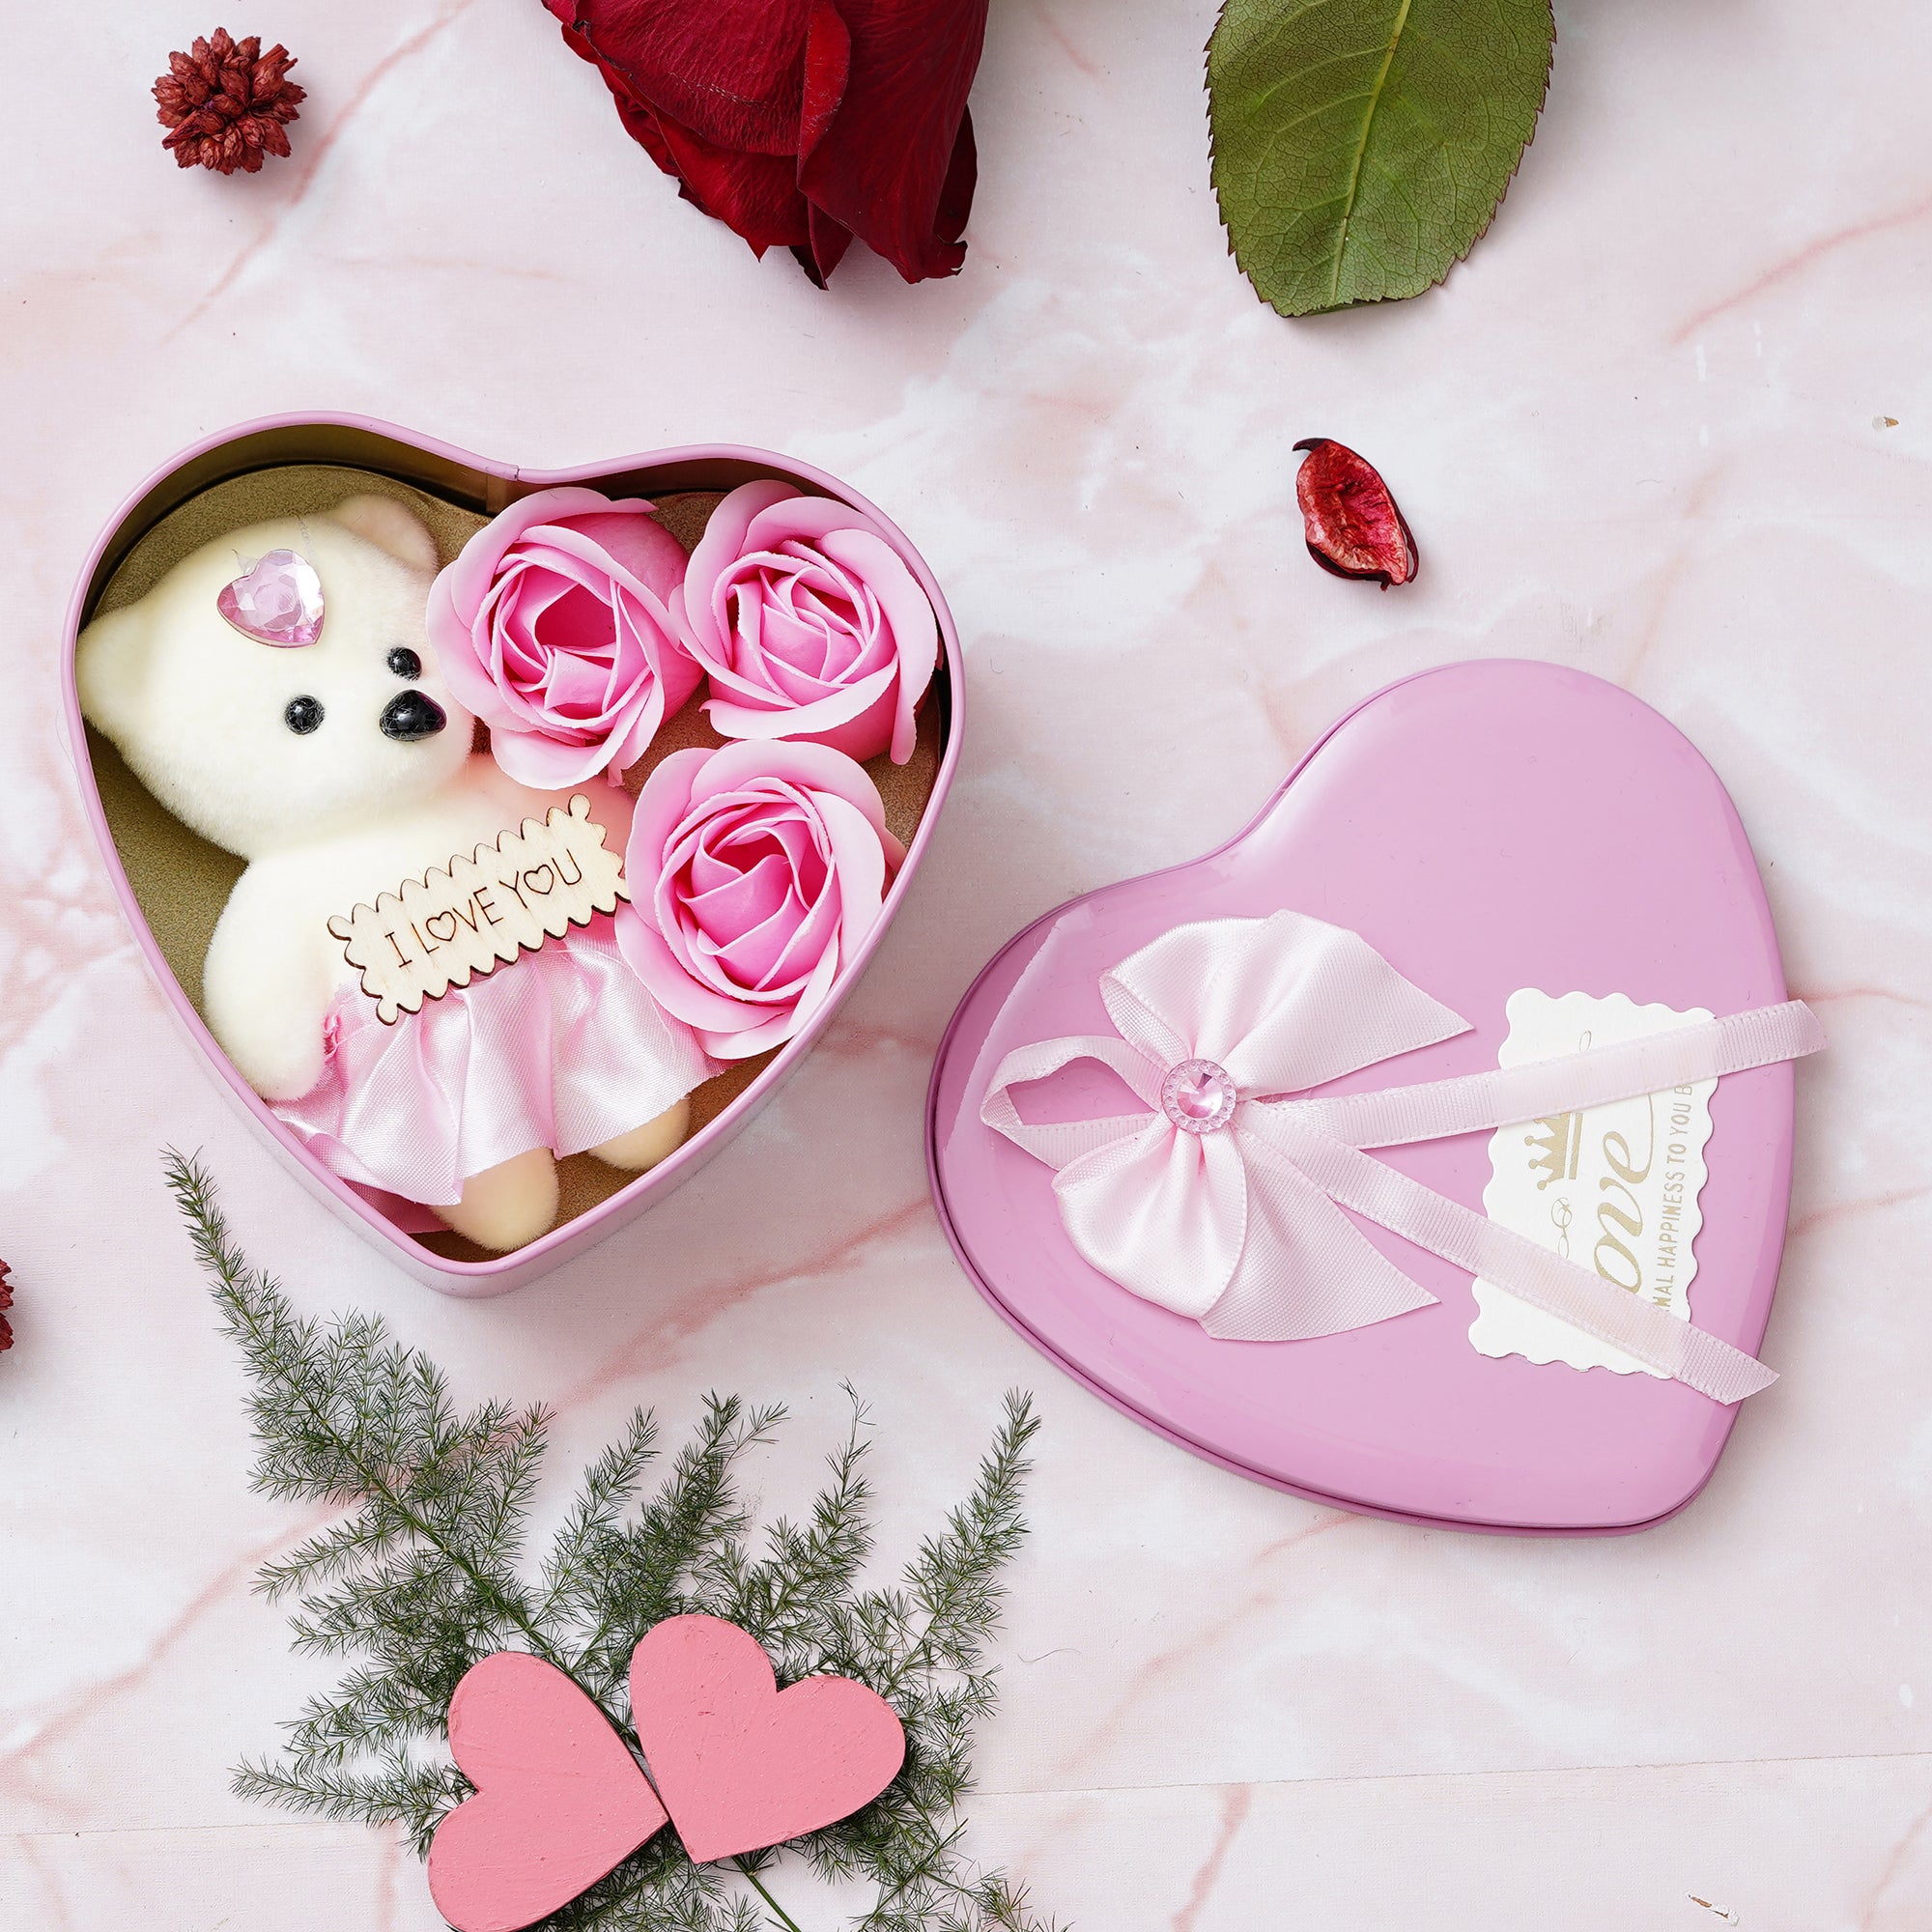 Valentine Combo of Golden Rose Gift Set, Pink Heart Shaped Gift Box with Teddy and Roses 3